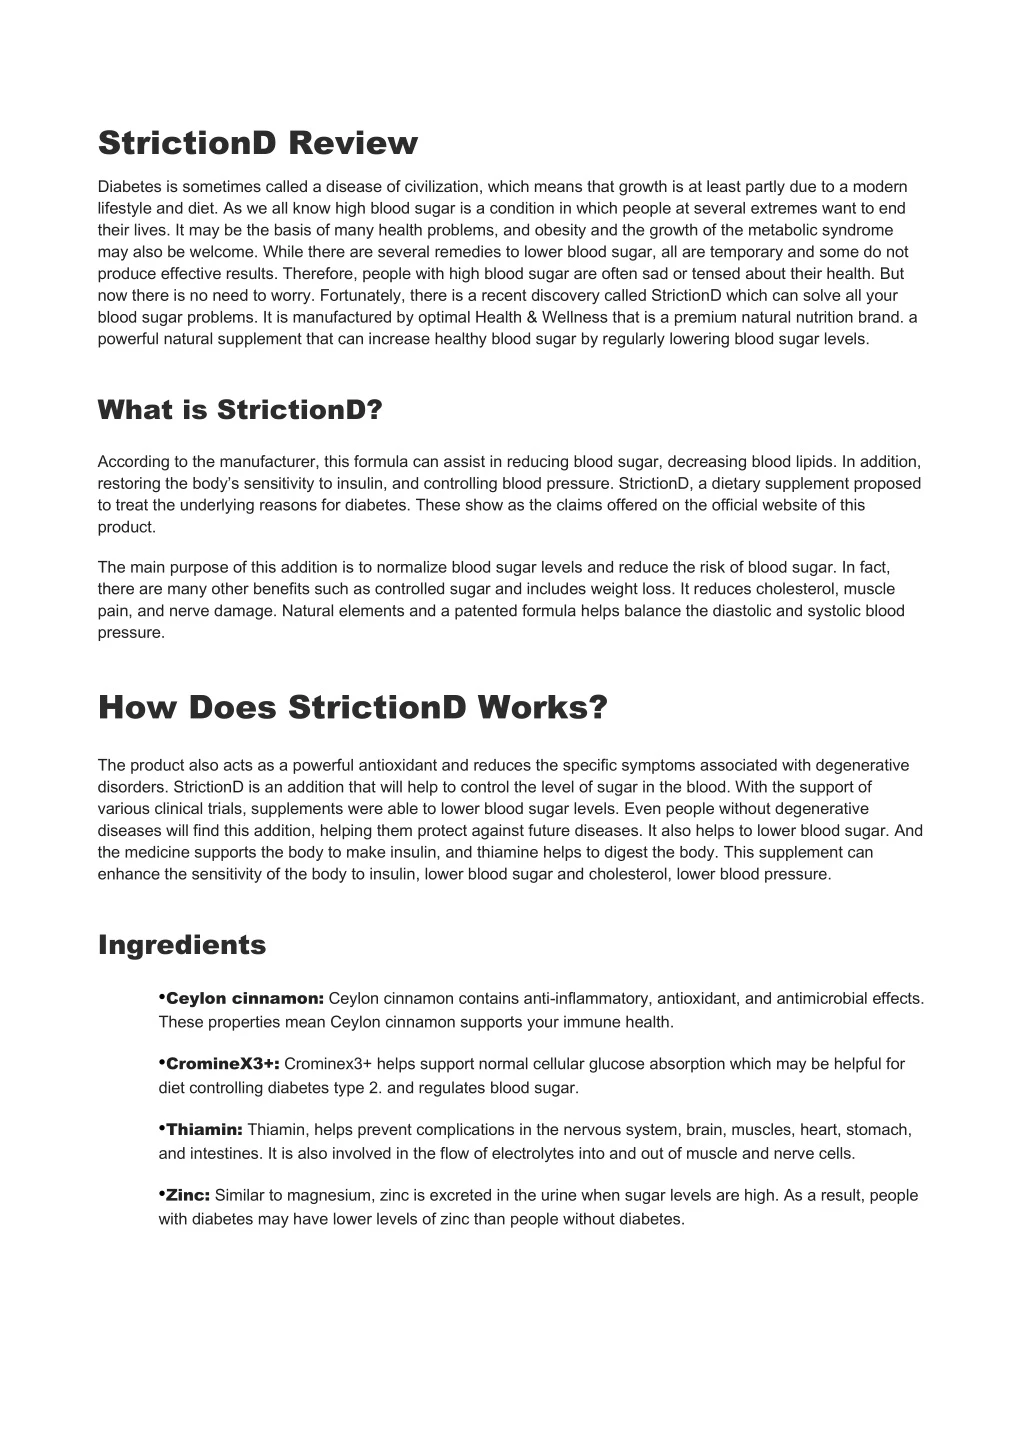 strictiond review